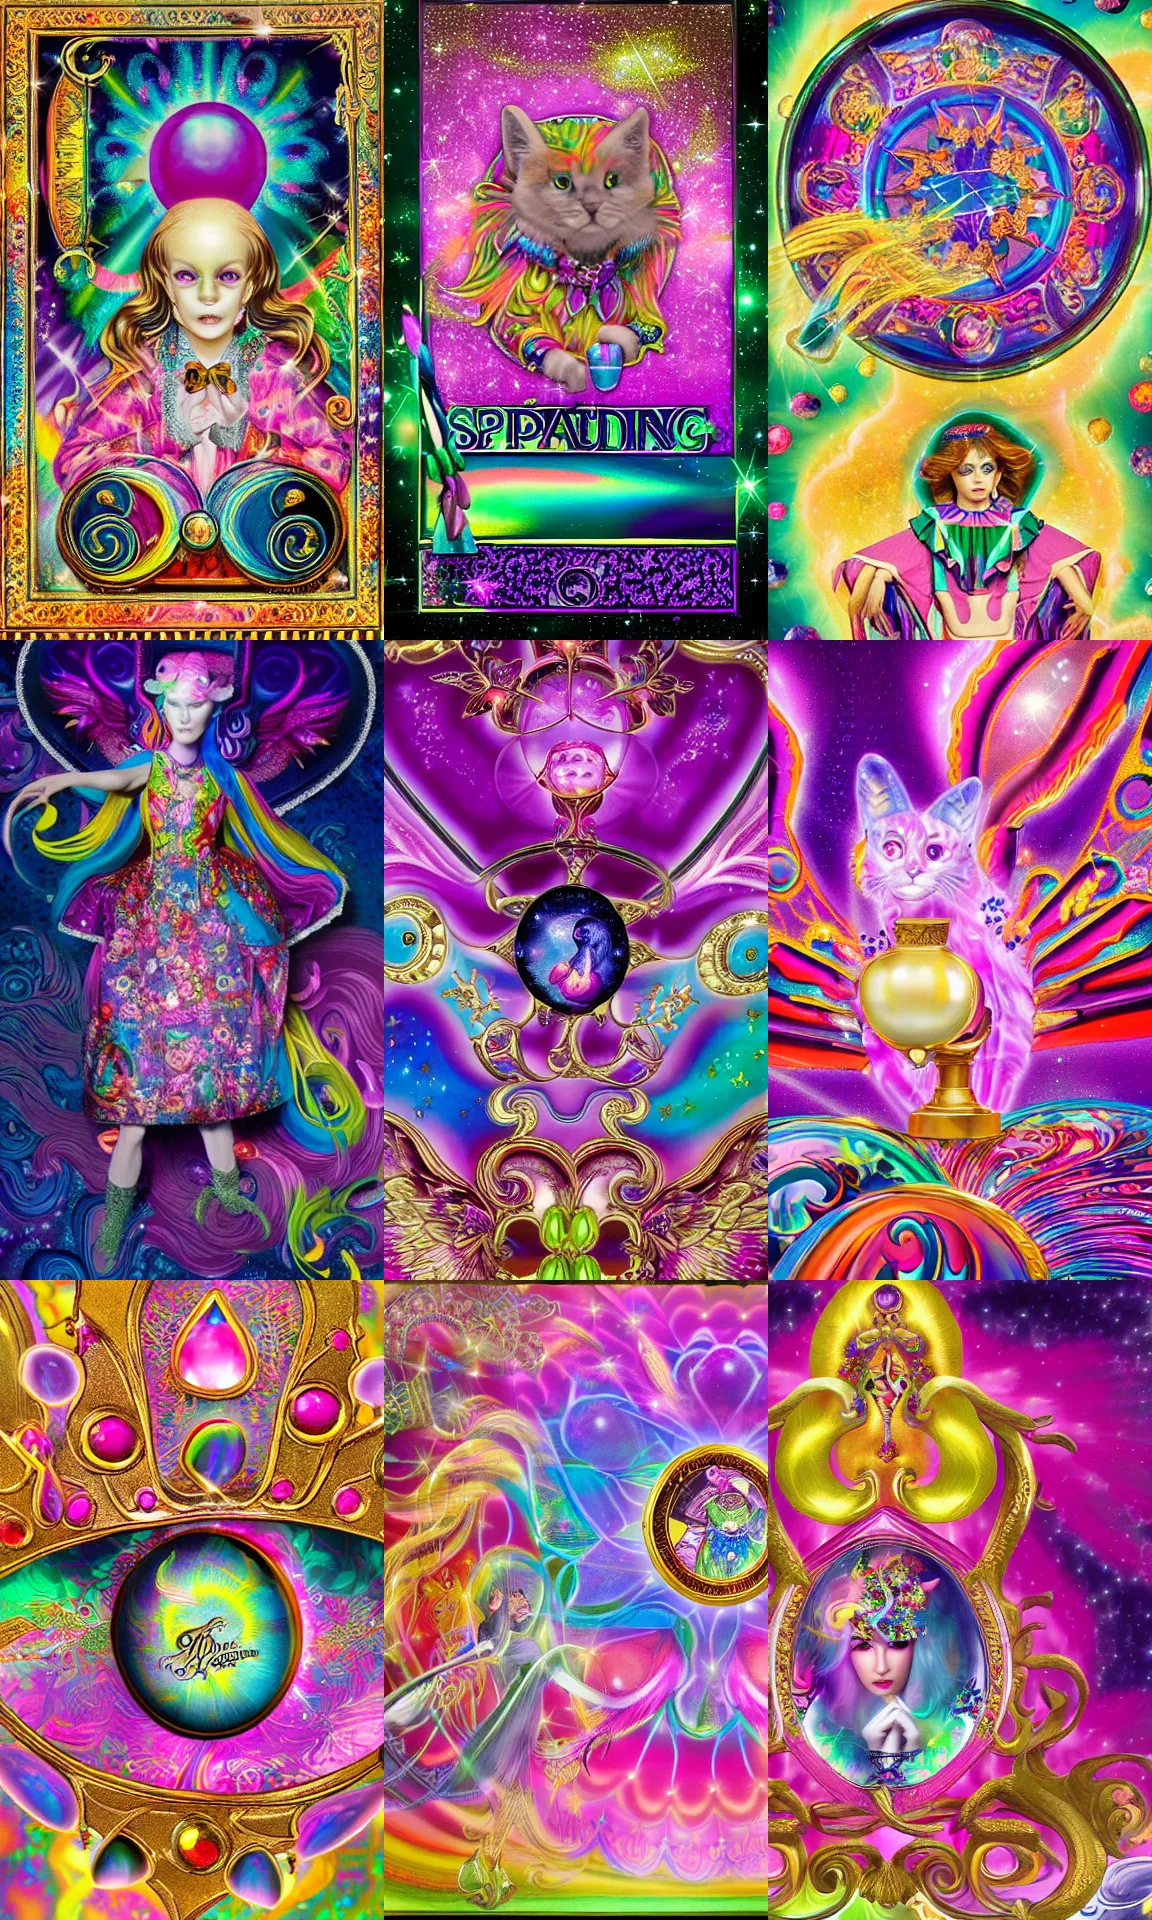 Prompt: legendary spellcasting focus designed by Lisa Frank in collaboration with The House of Fabergé, high resolution auction photo